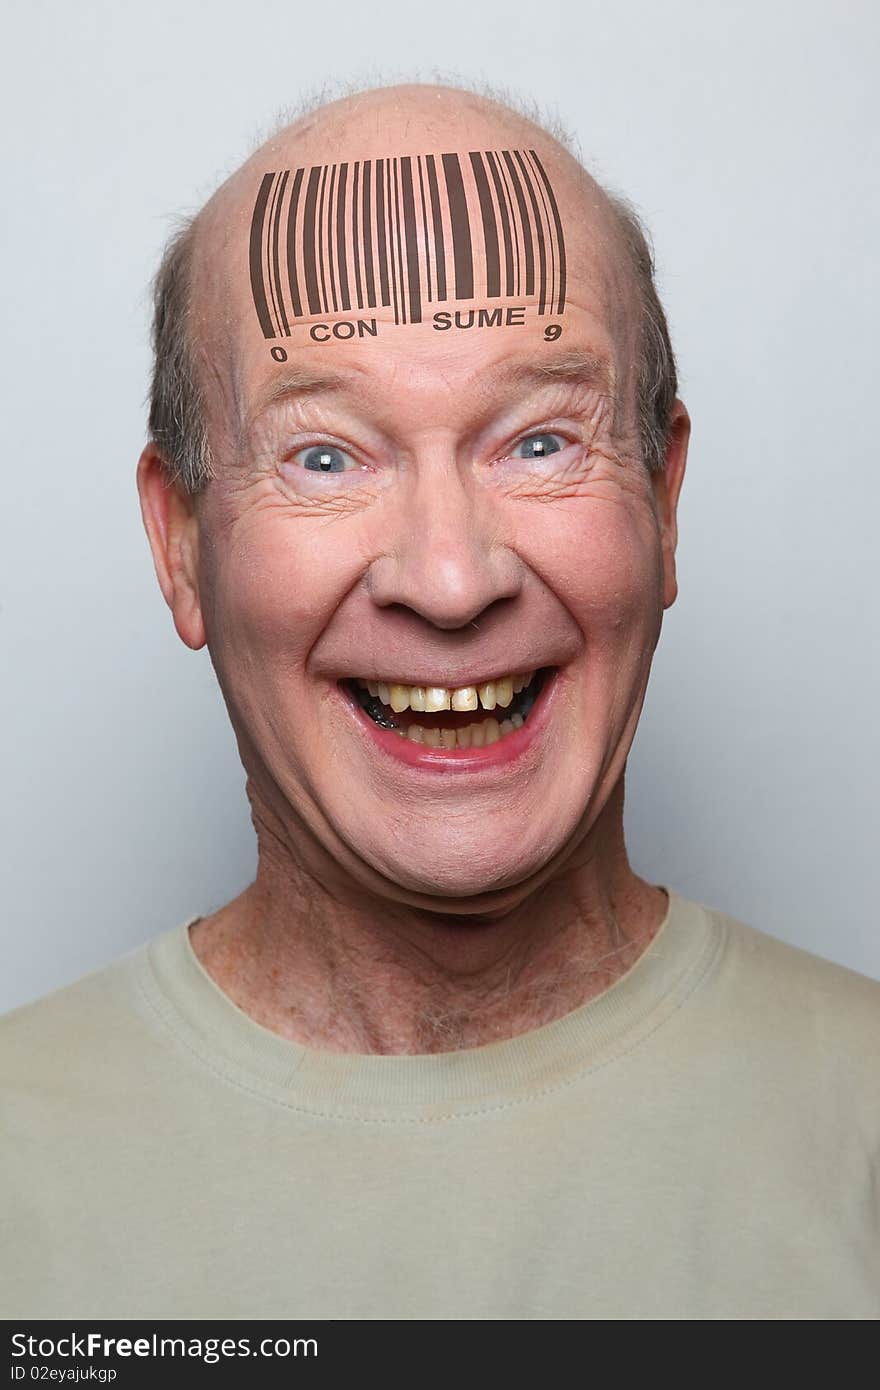 Idiotic consumer with a bar code on his forehead. Idiotic consumer with a bar code on his forehead